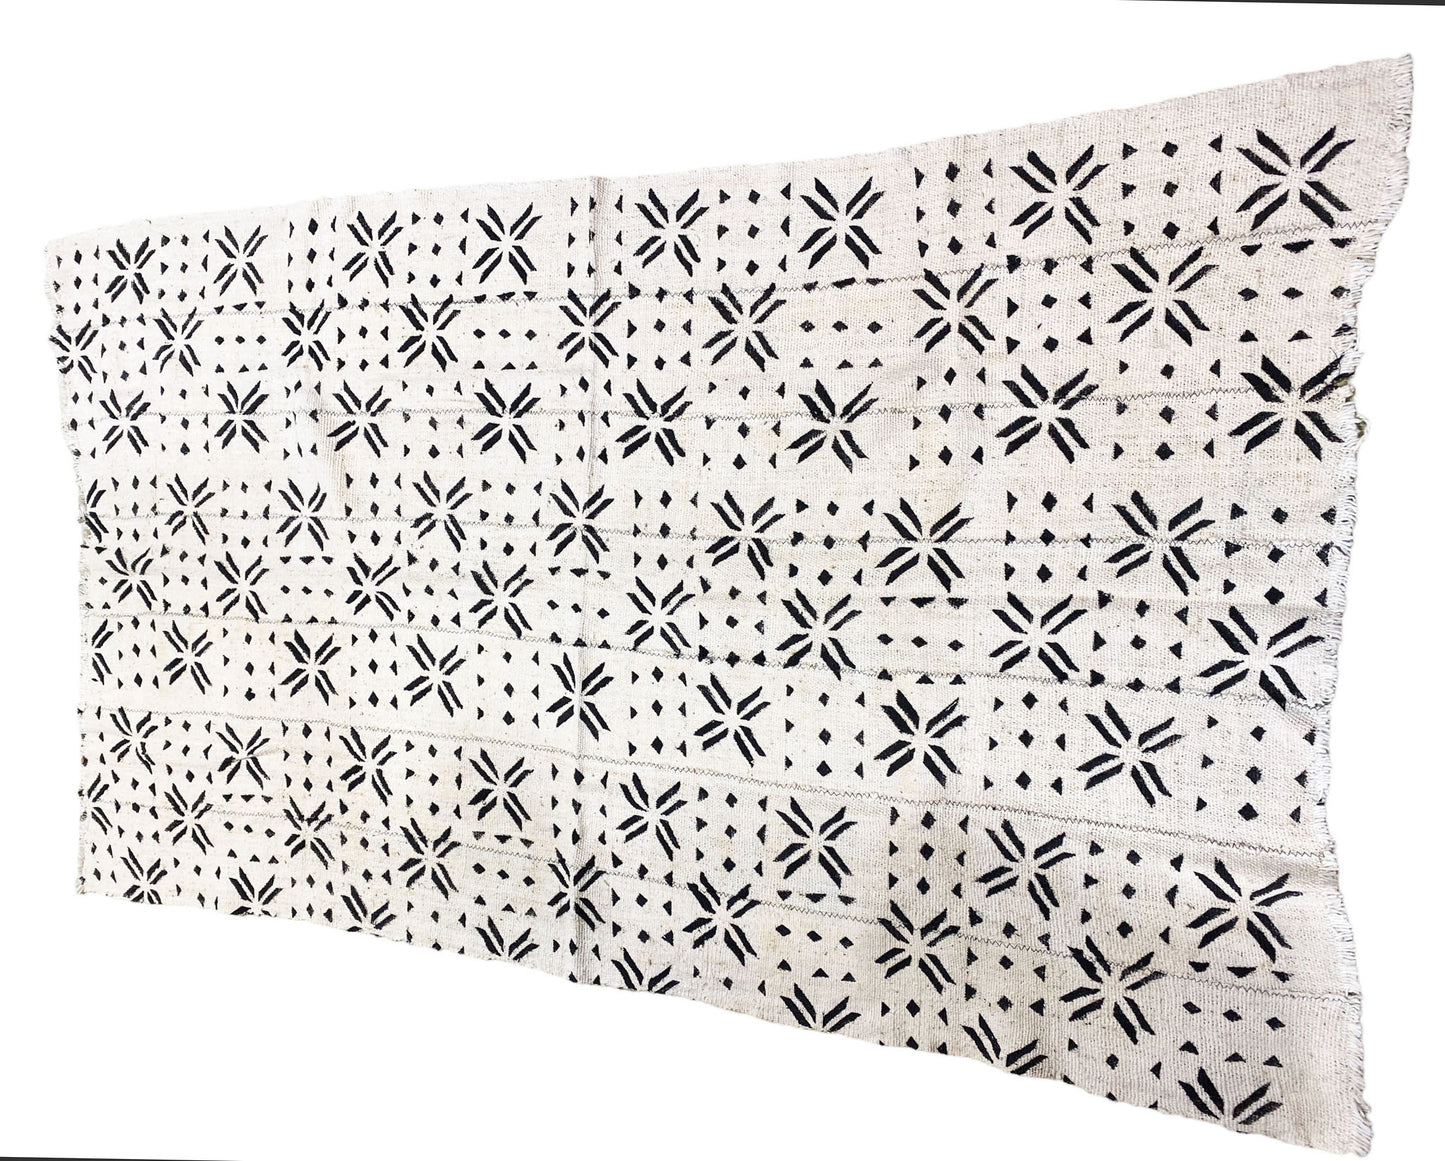 #5341 African  Black and White Mud Cloth Textile Mali 37" by 65"